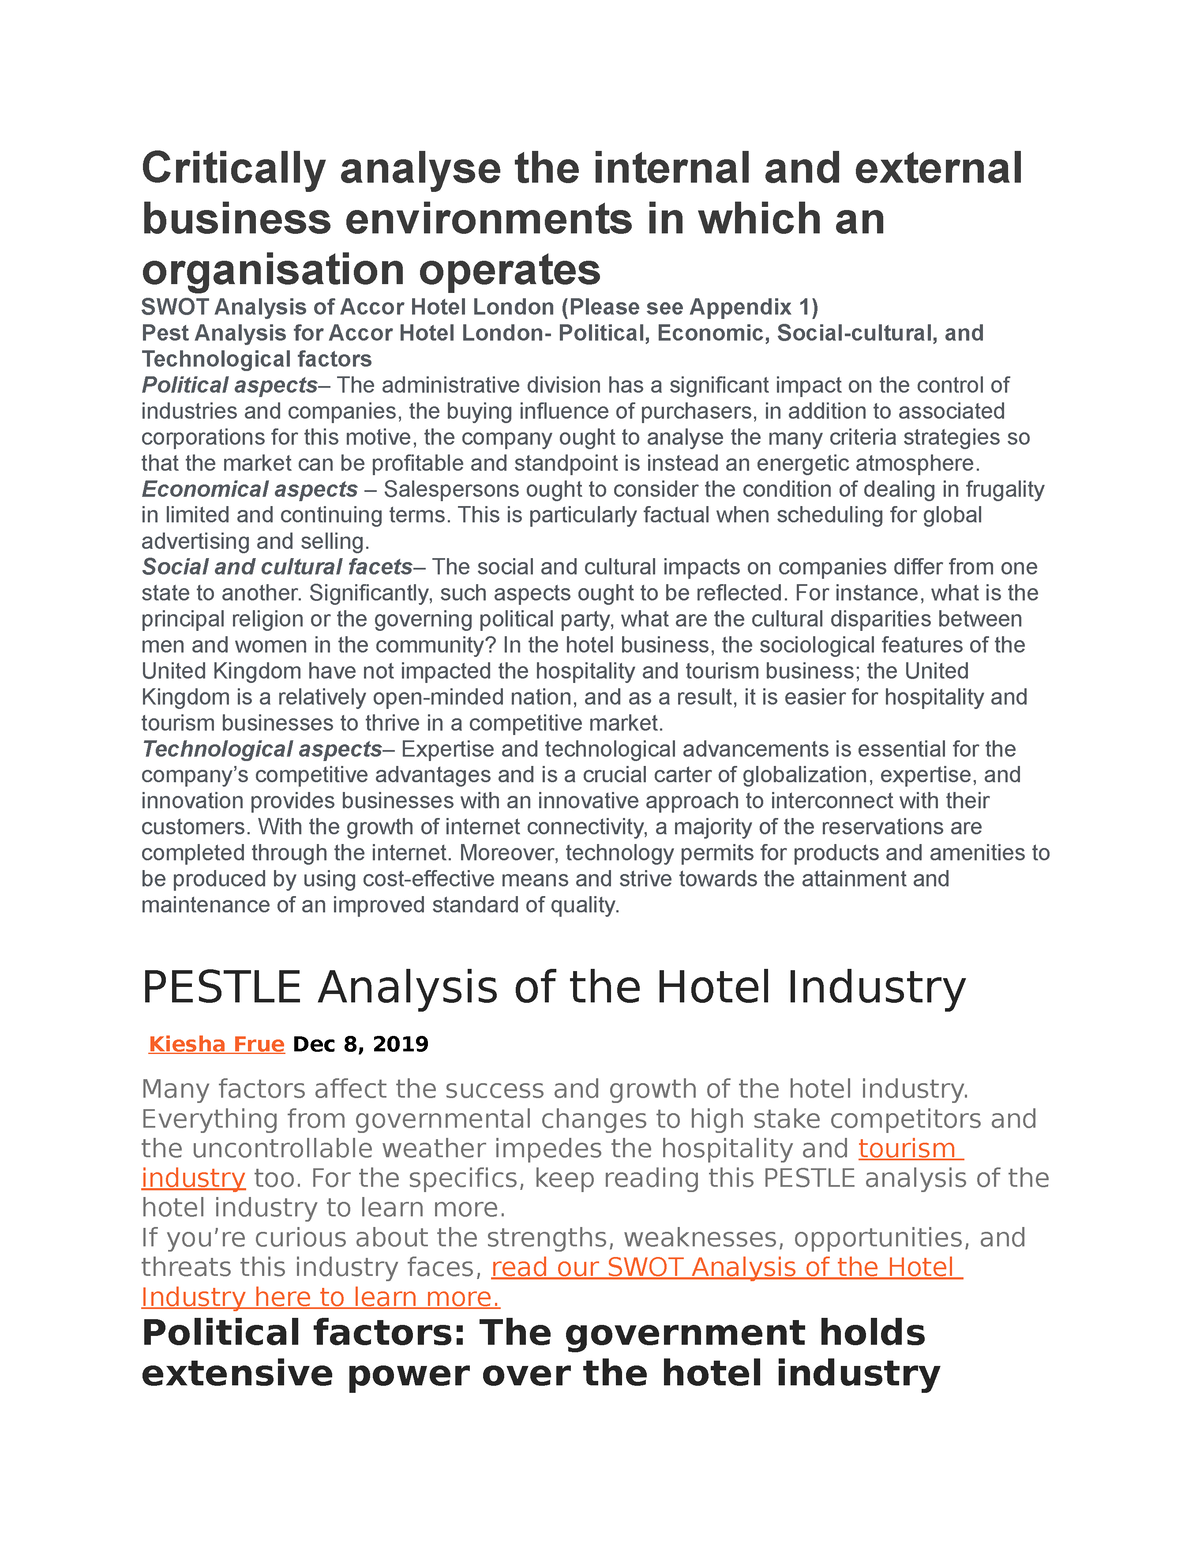 Pestel Hotel Critically Analyse The Internal And External Business Environments In Which An